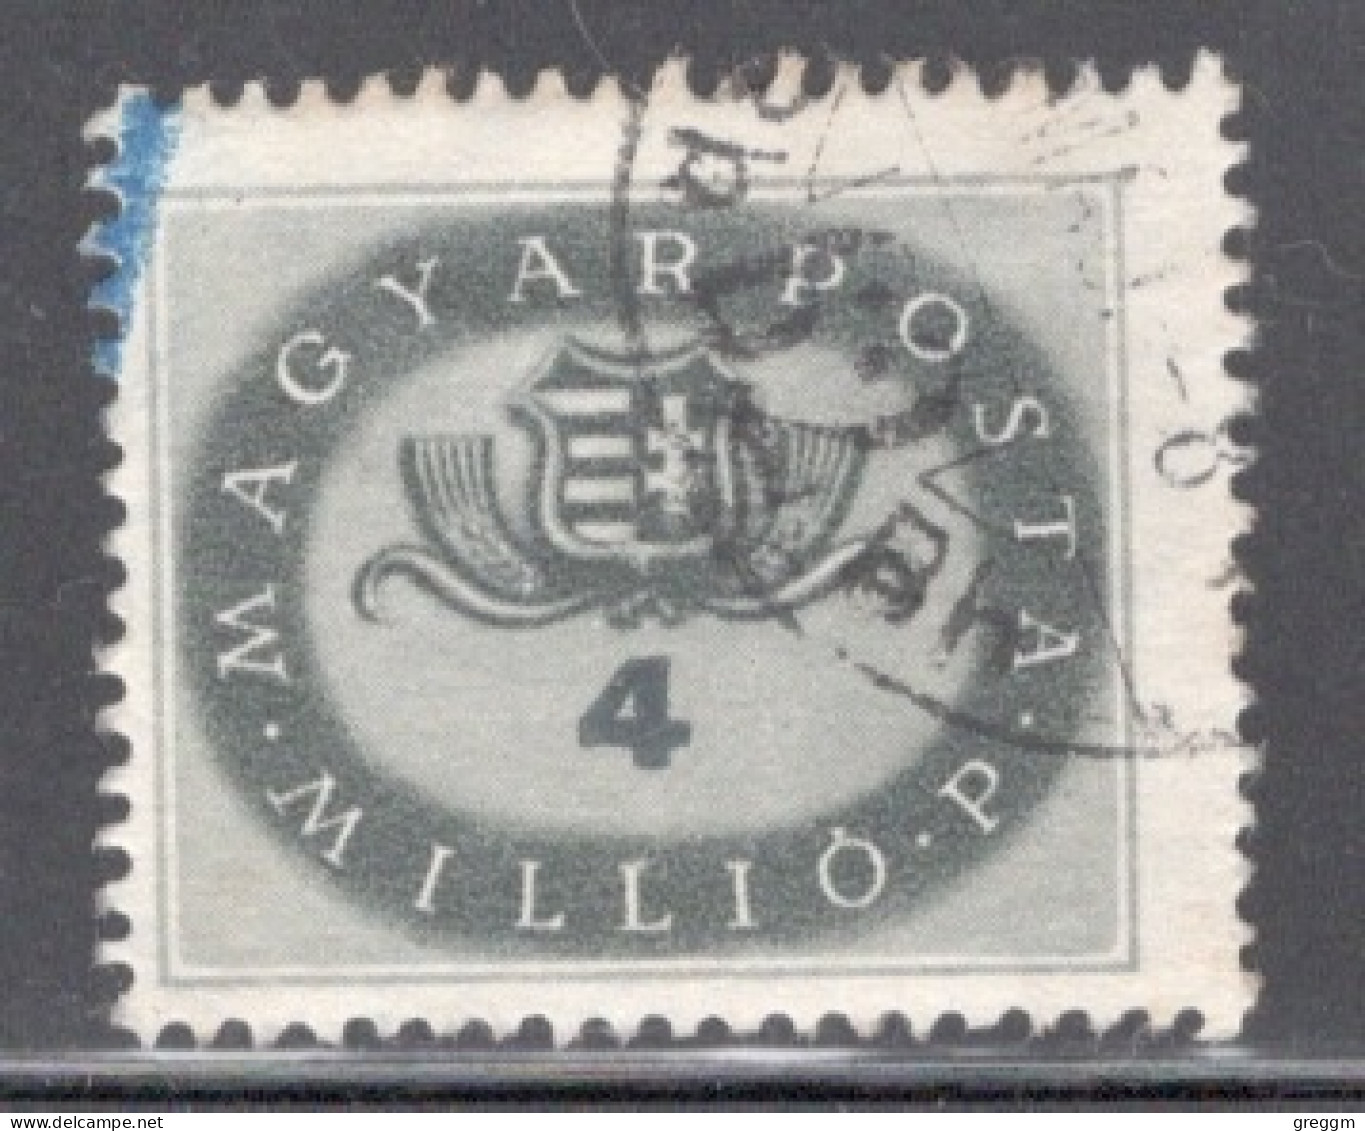 Hungary 1946  Single Stamp Coat Of Arms In Fine Used - Oblitérés